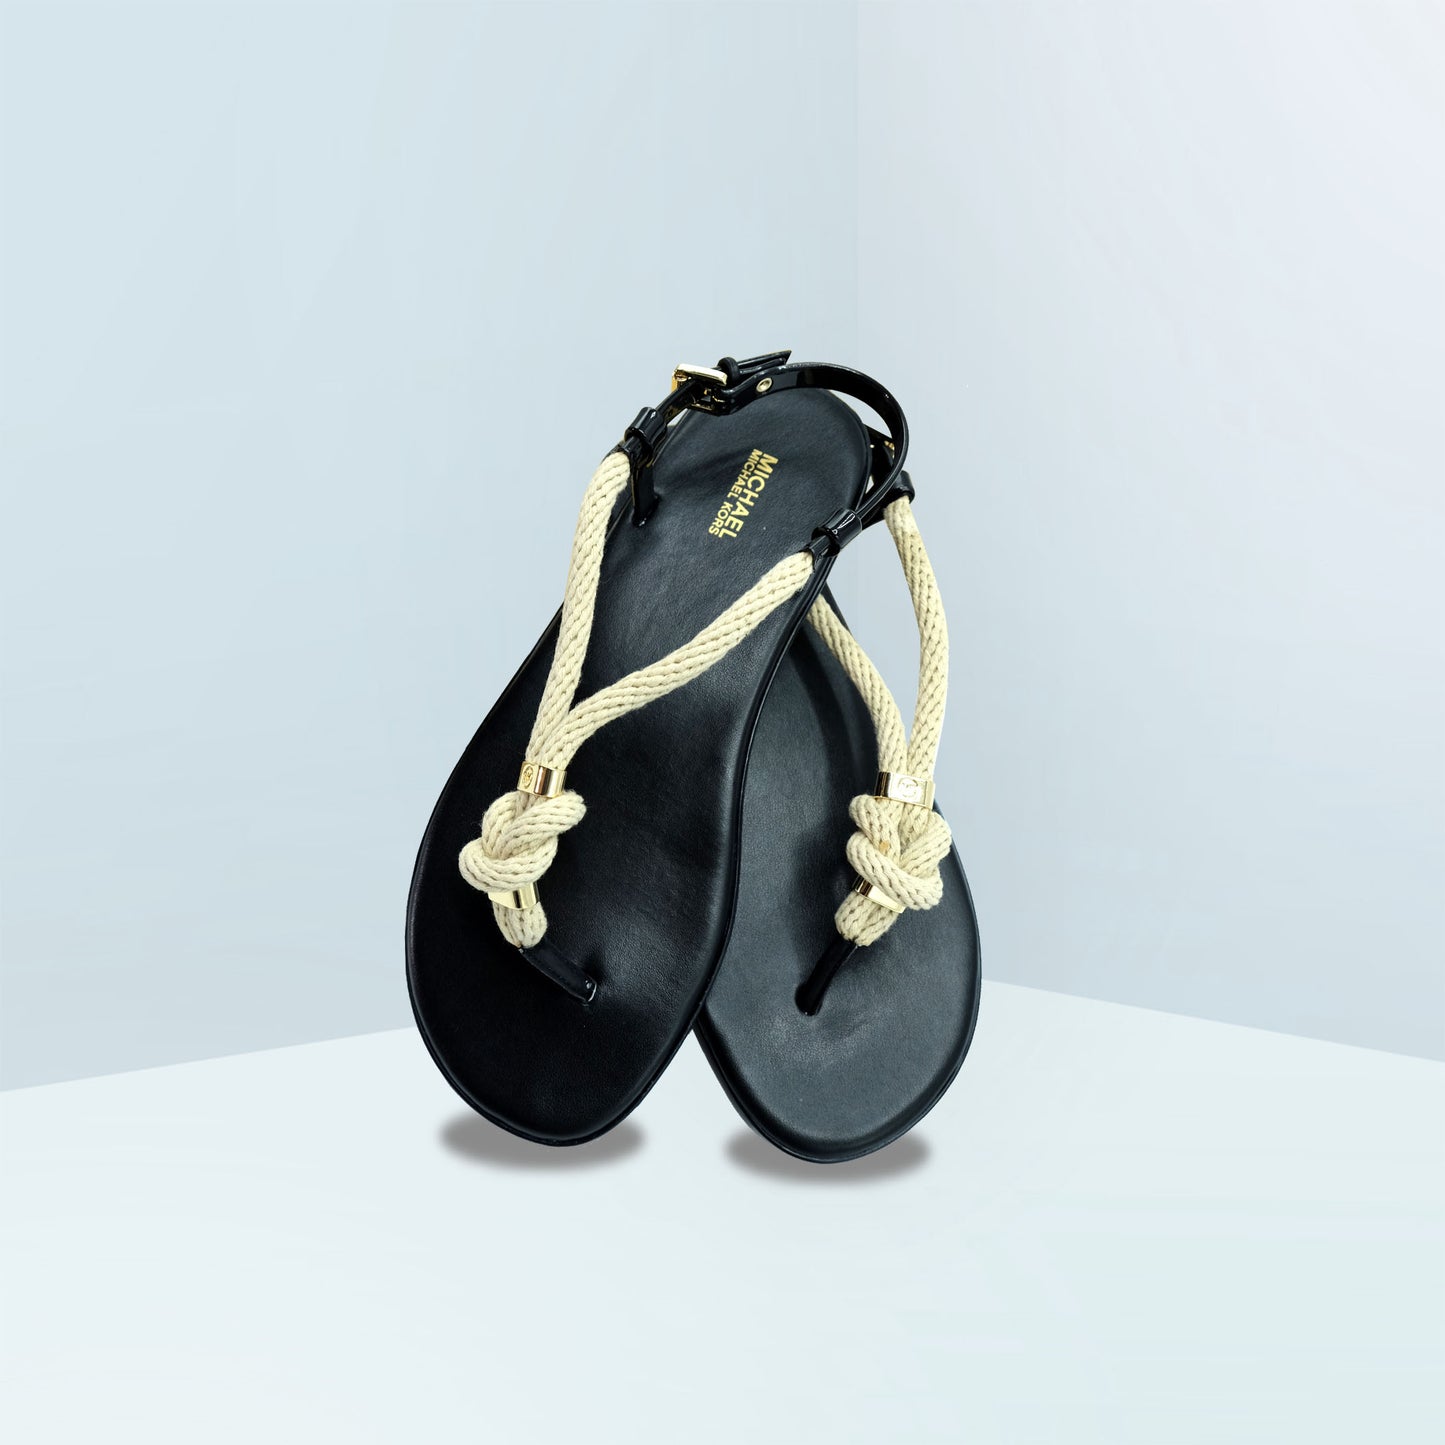 Holly Jelly Rope Sandals